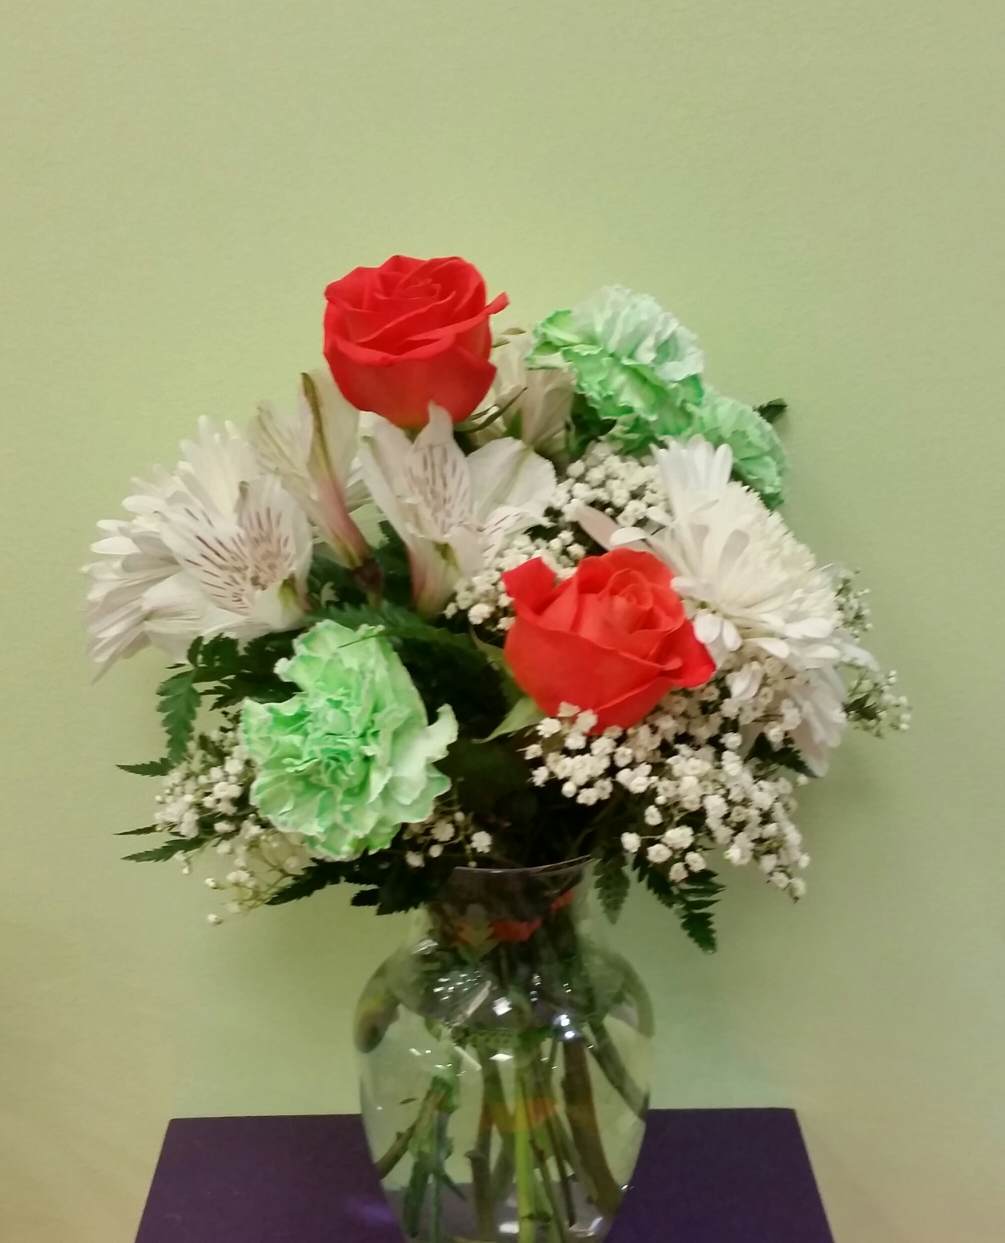 Send this Ireland themed arrangement that is perfect to spread some cheer